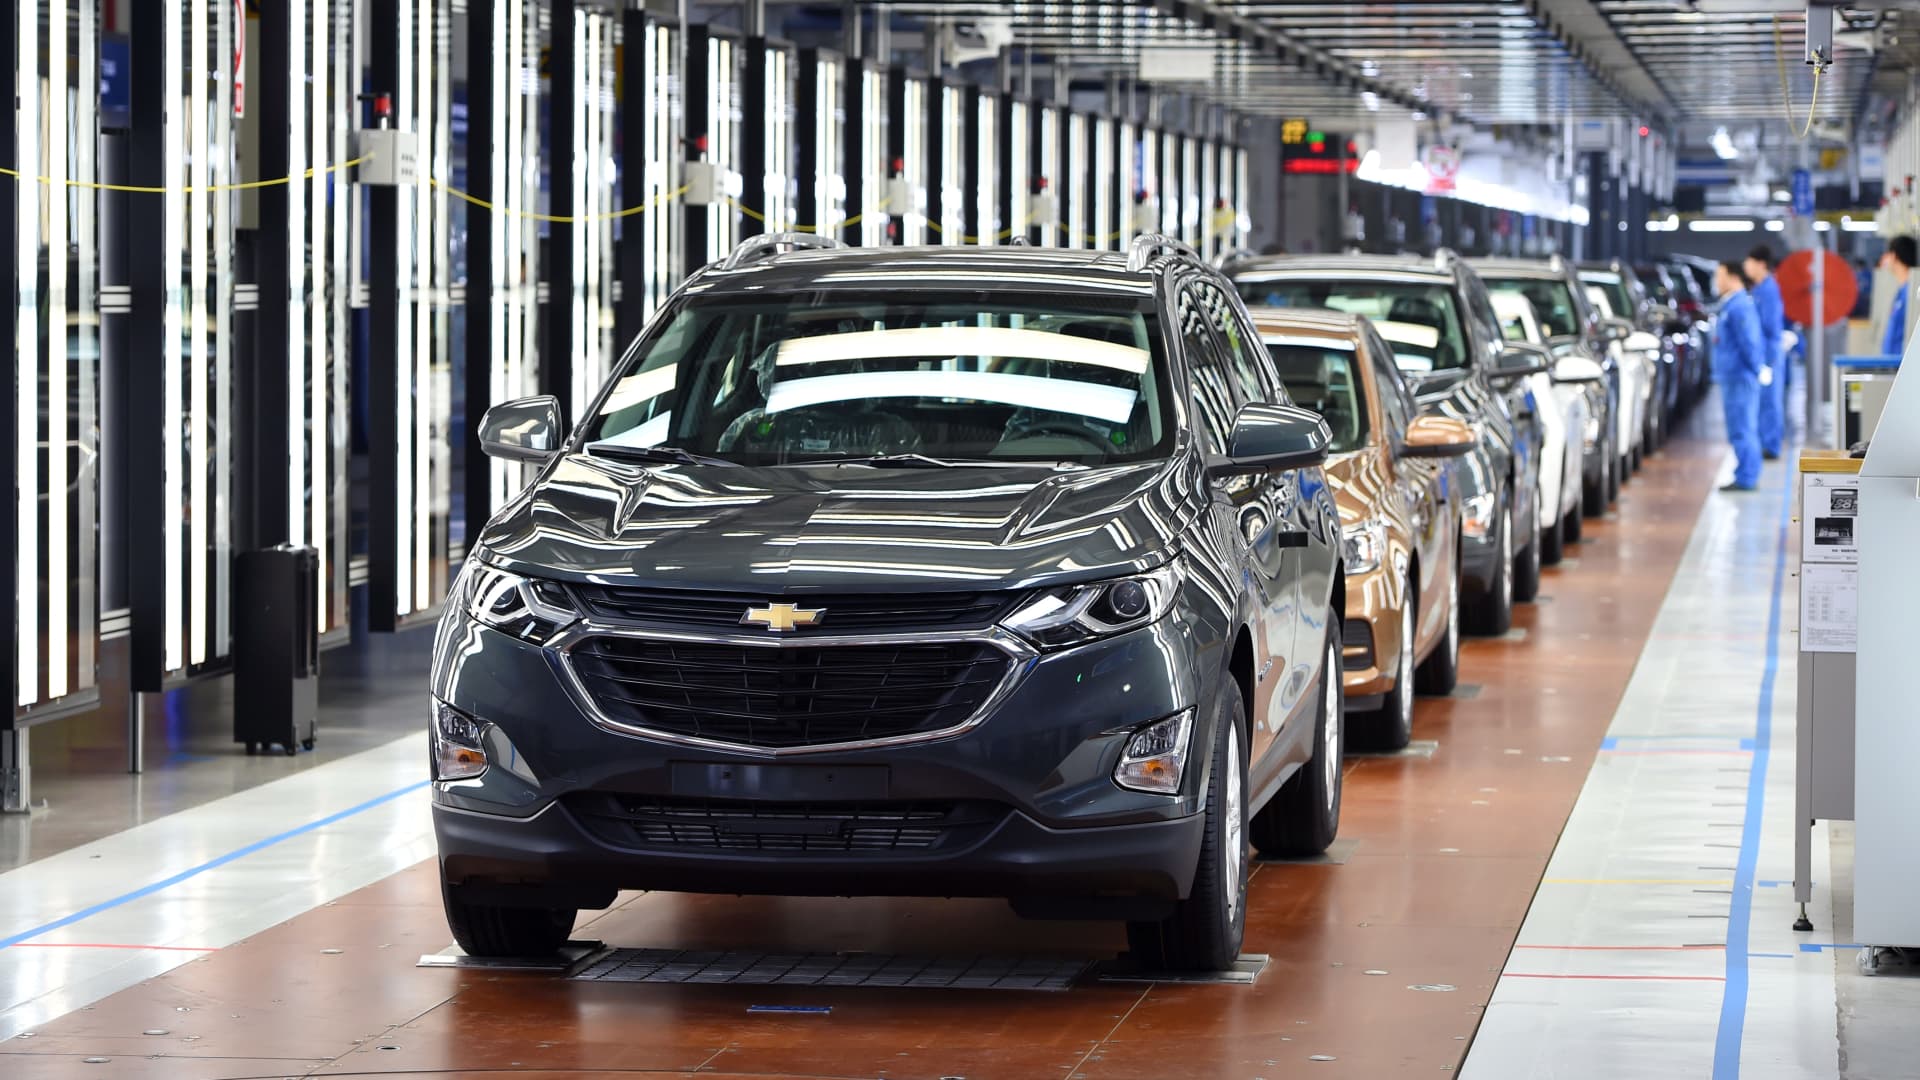 A Chevrolet Equinox SUV is seen on the production line at SAIC-GM Wuhan Manufacturing Plant on April 7, 2017 in Wuhan, China.